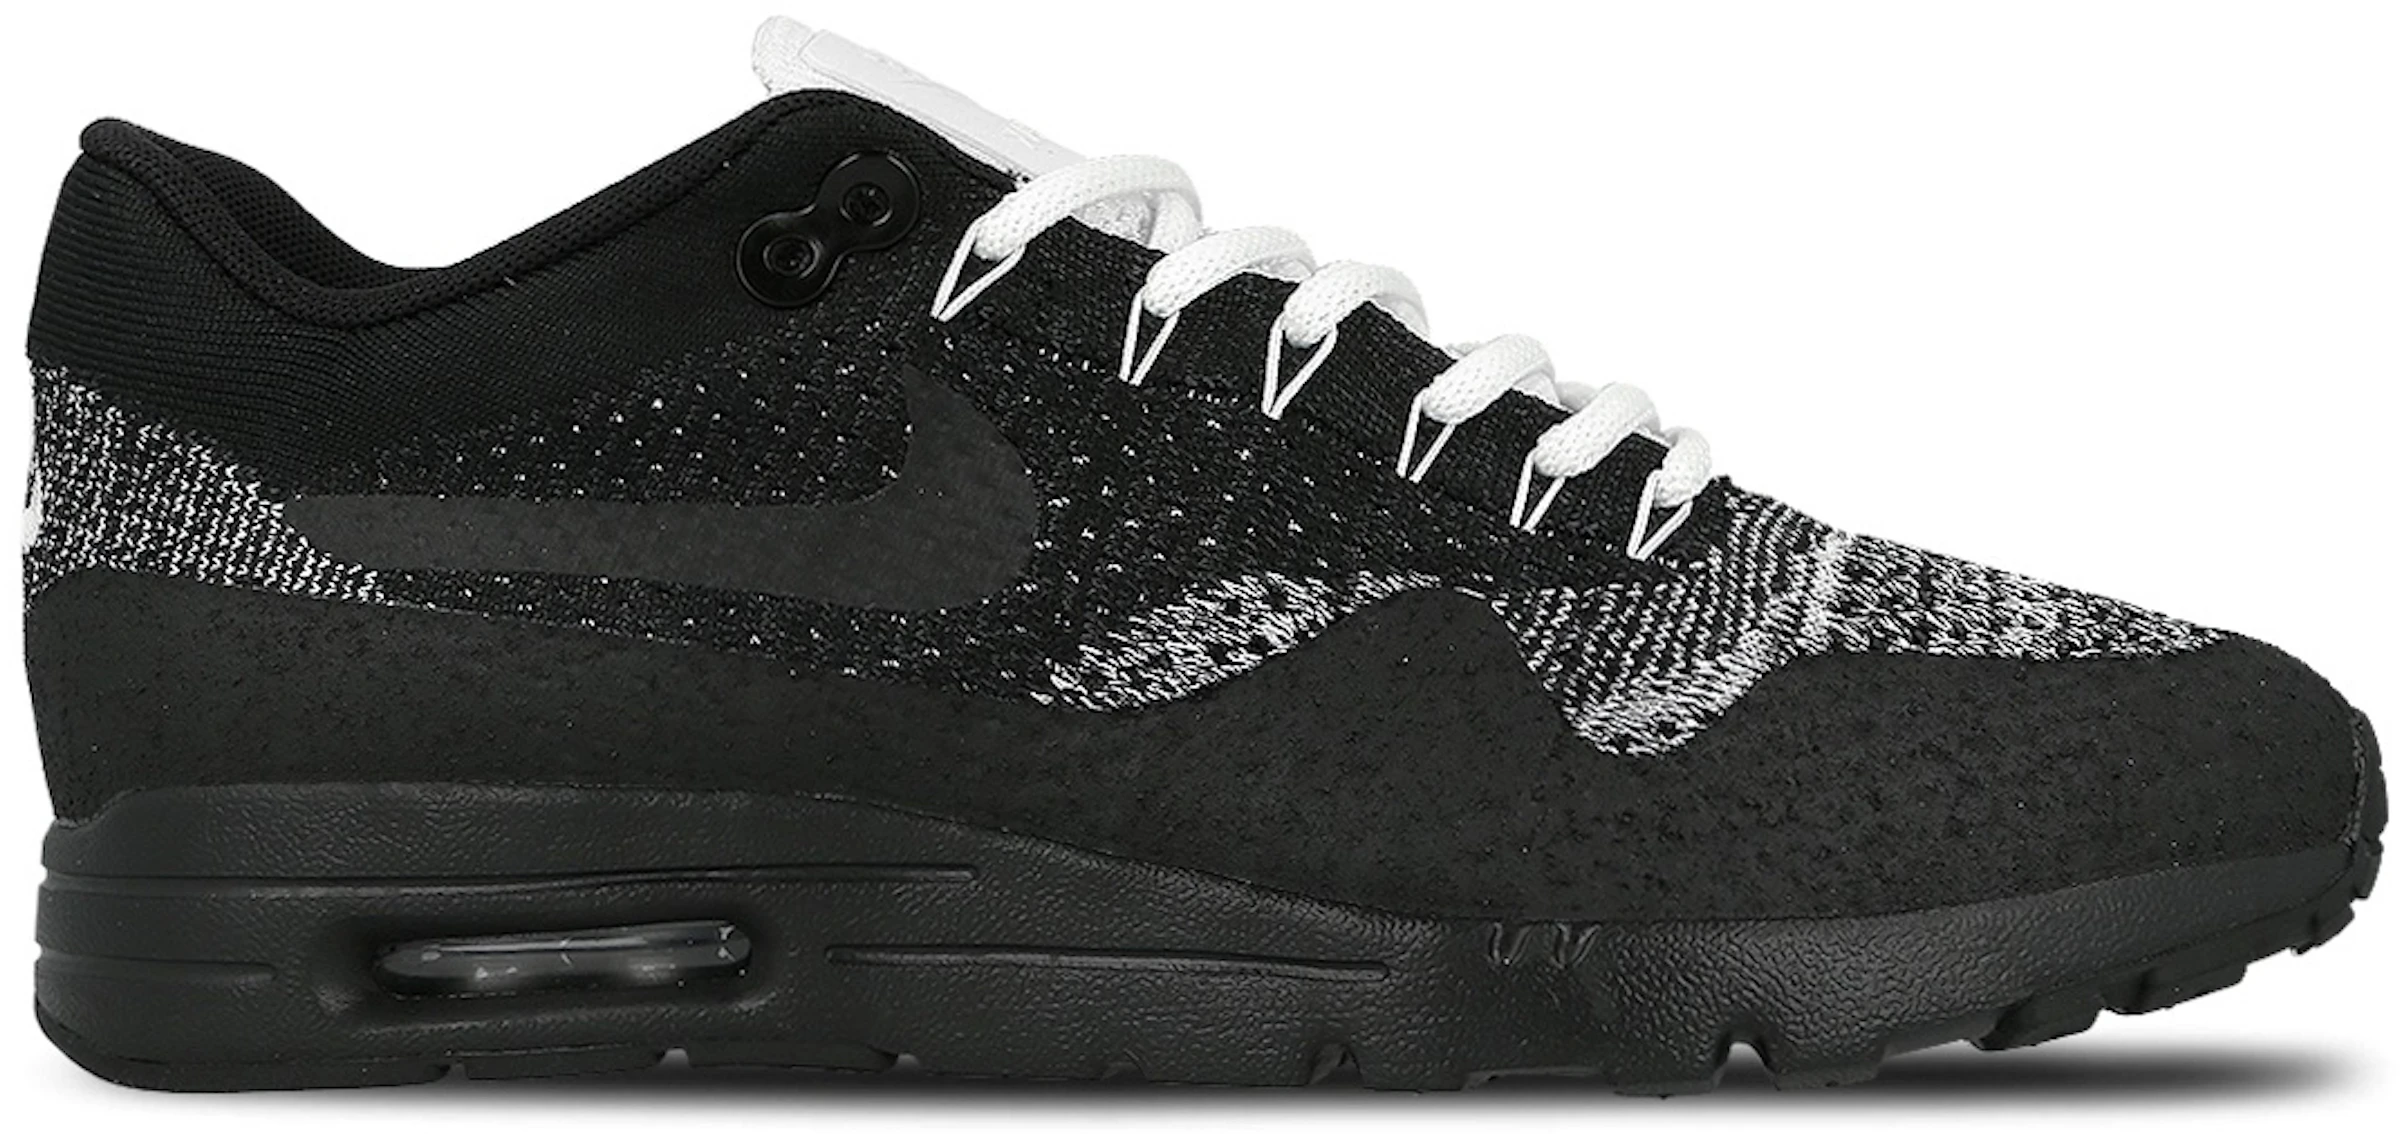 Nike Air Max 1 Ultra Flyknit Black Anthracite (W) - 859517-001 -